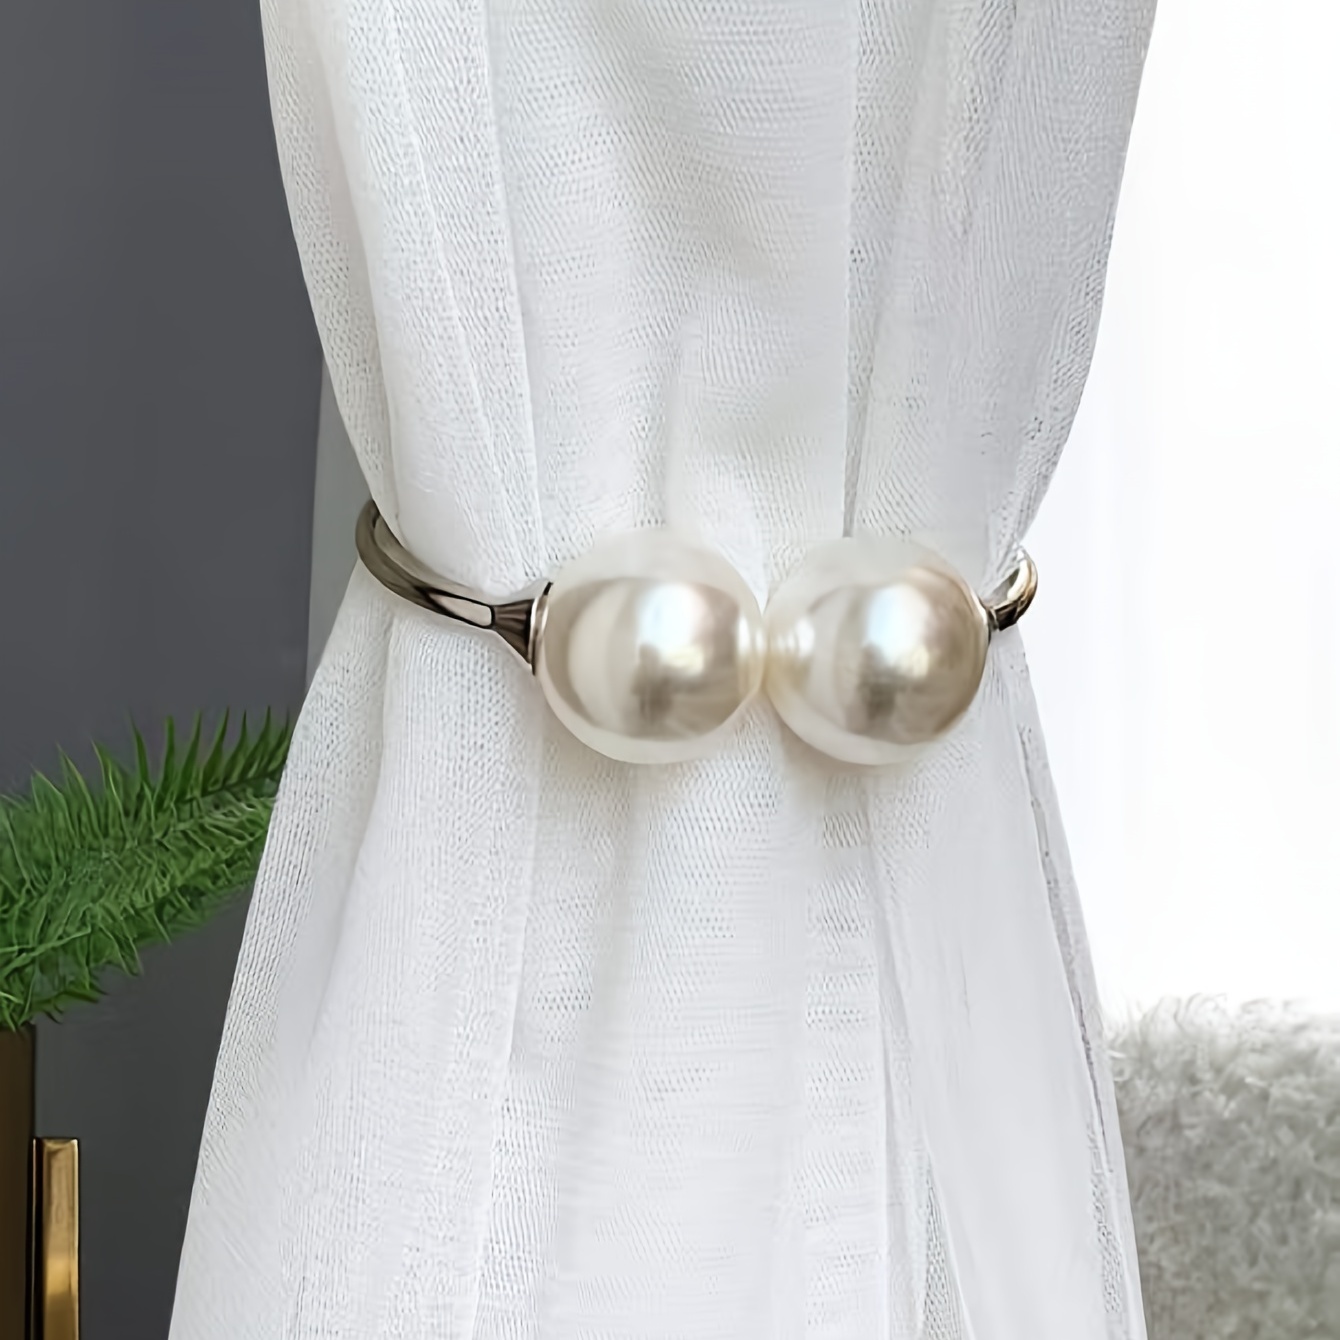 New 2/1PCS Small Pearl Curtain Clip Curtain Holders Tie Back